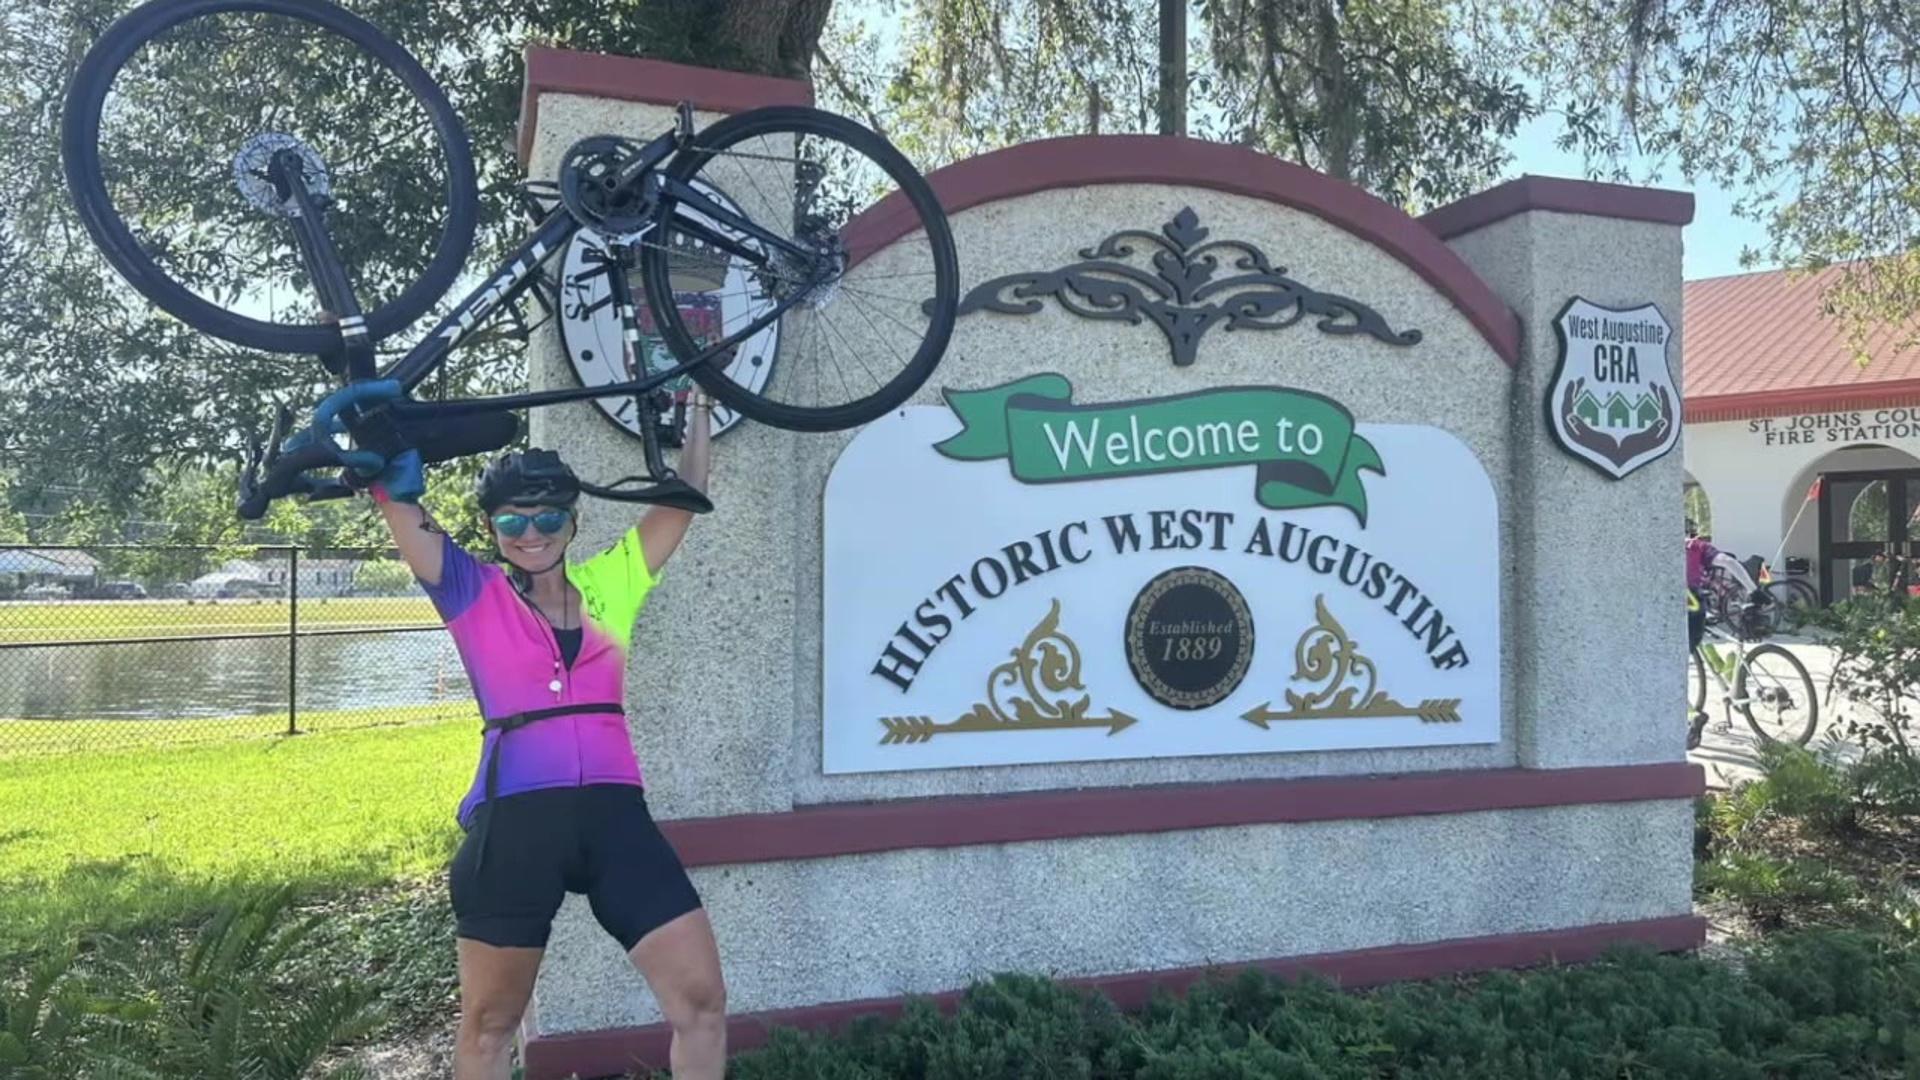 A former Sullivan County commissioner just finished a 60-day bike ride across the country, but the trip was about more than just the sights.